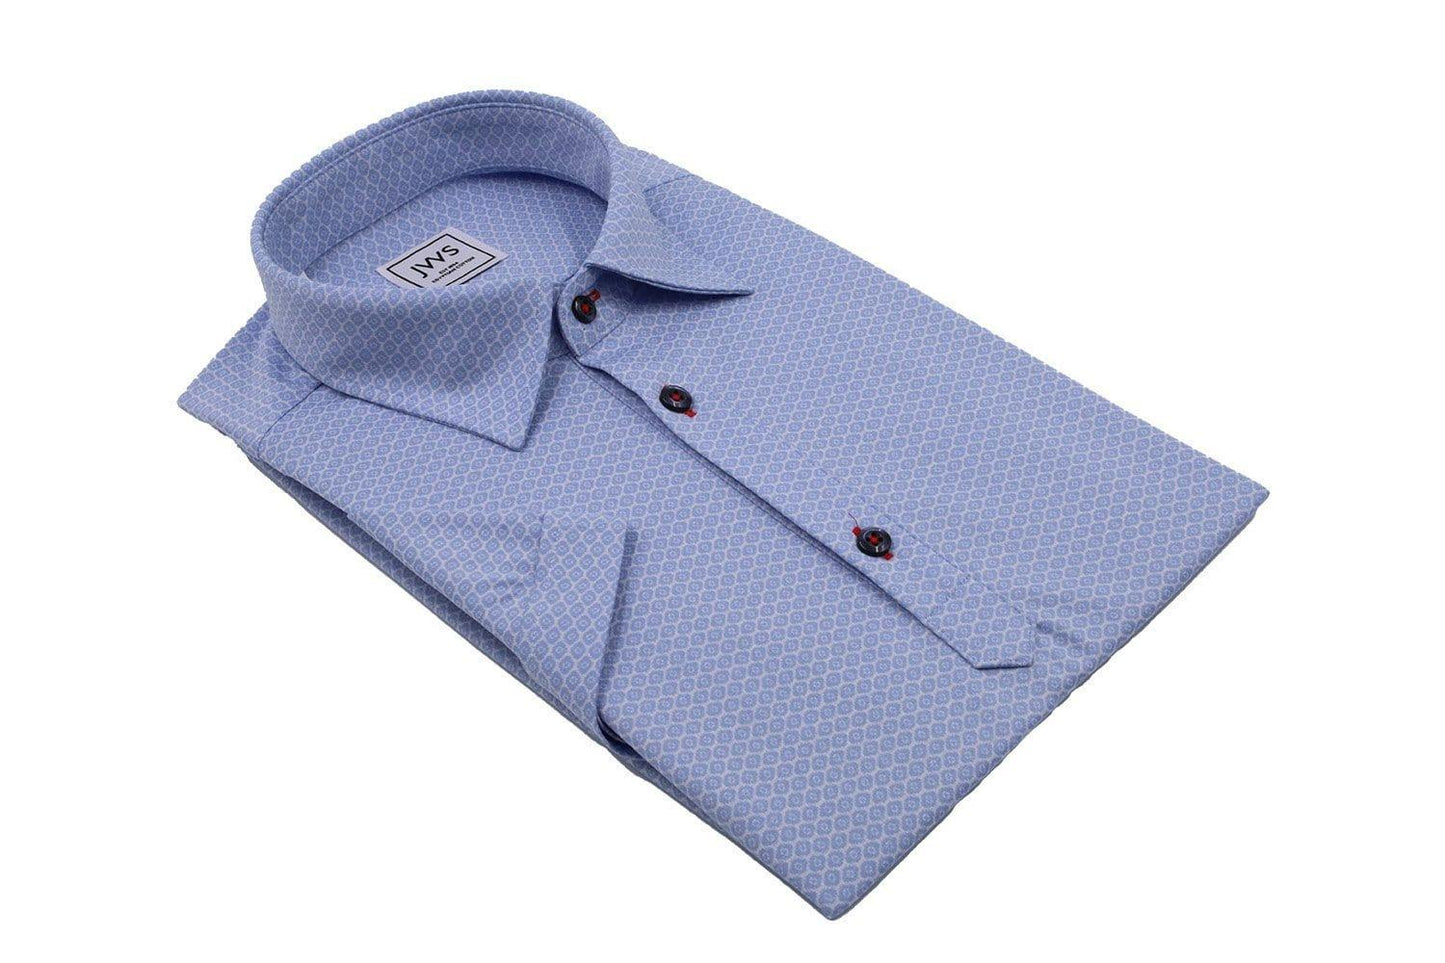 Mid Blue on White Oval Jacquard Knit Polo Shirt - Just White Shirts